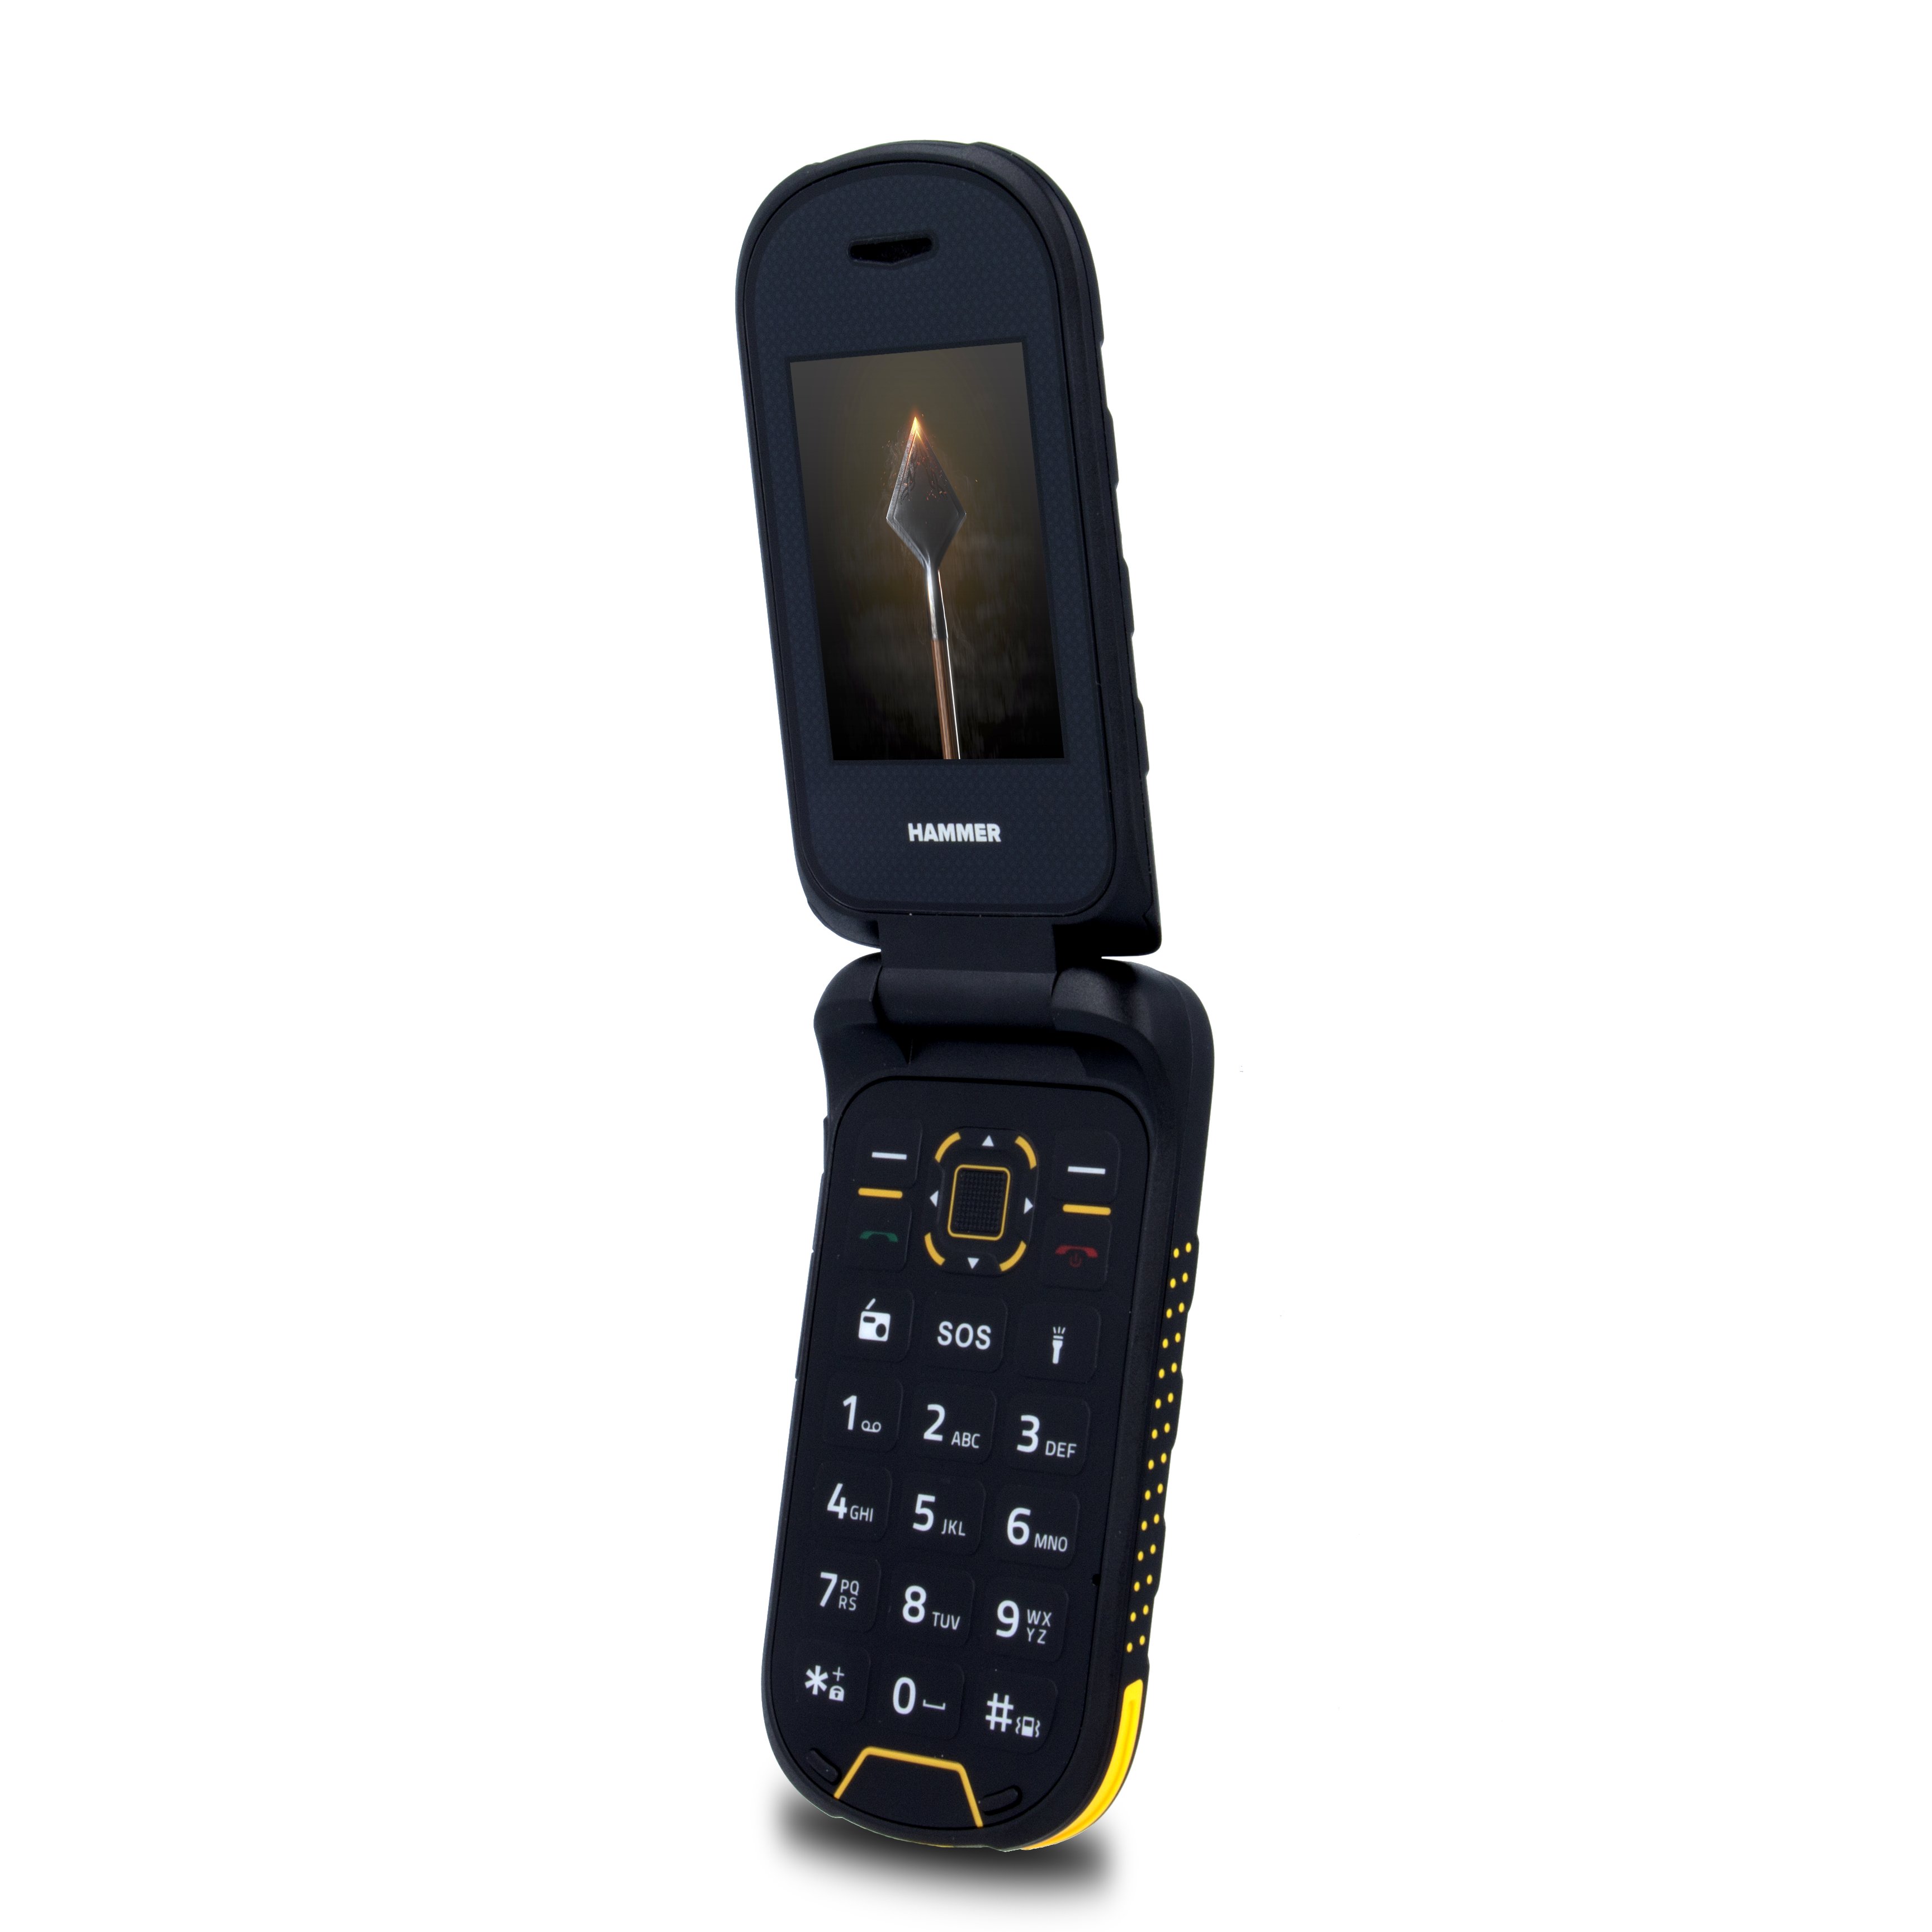 SIM Free HAMMER BOW+ Rugged Mobile Phone Review